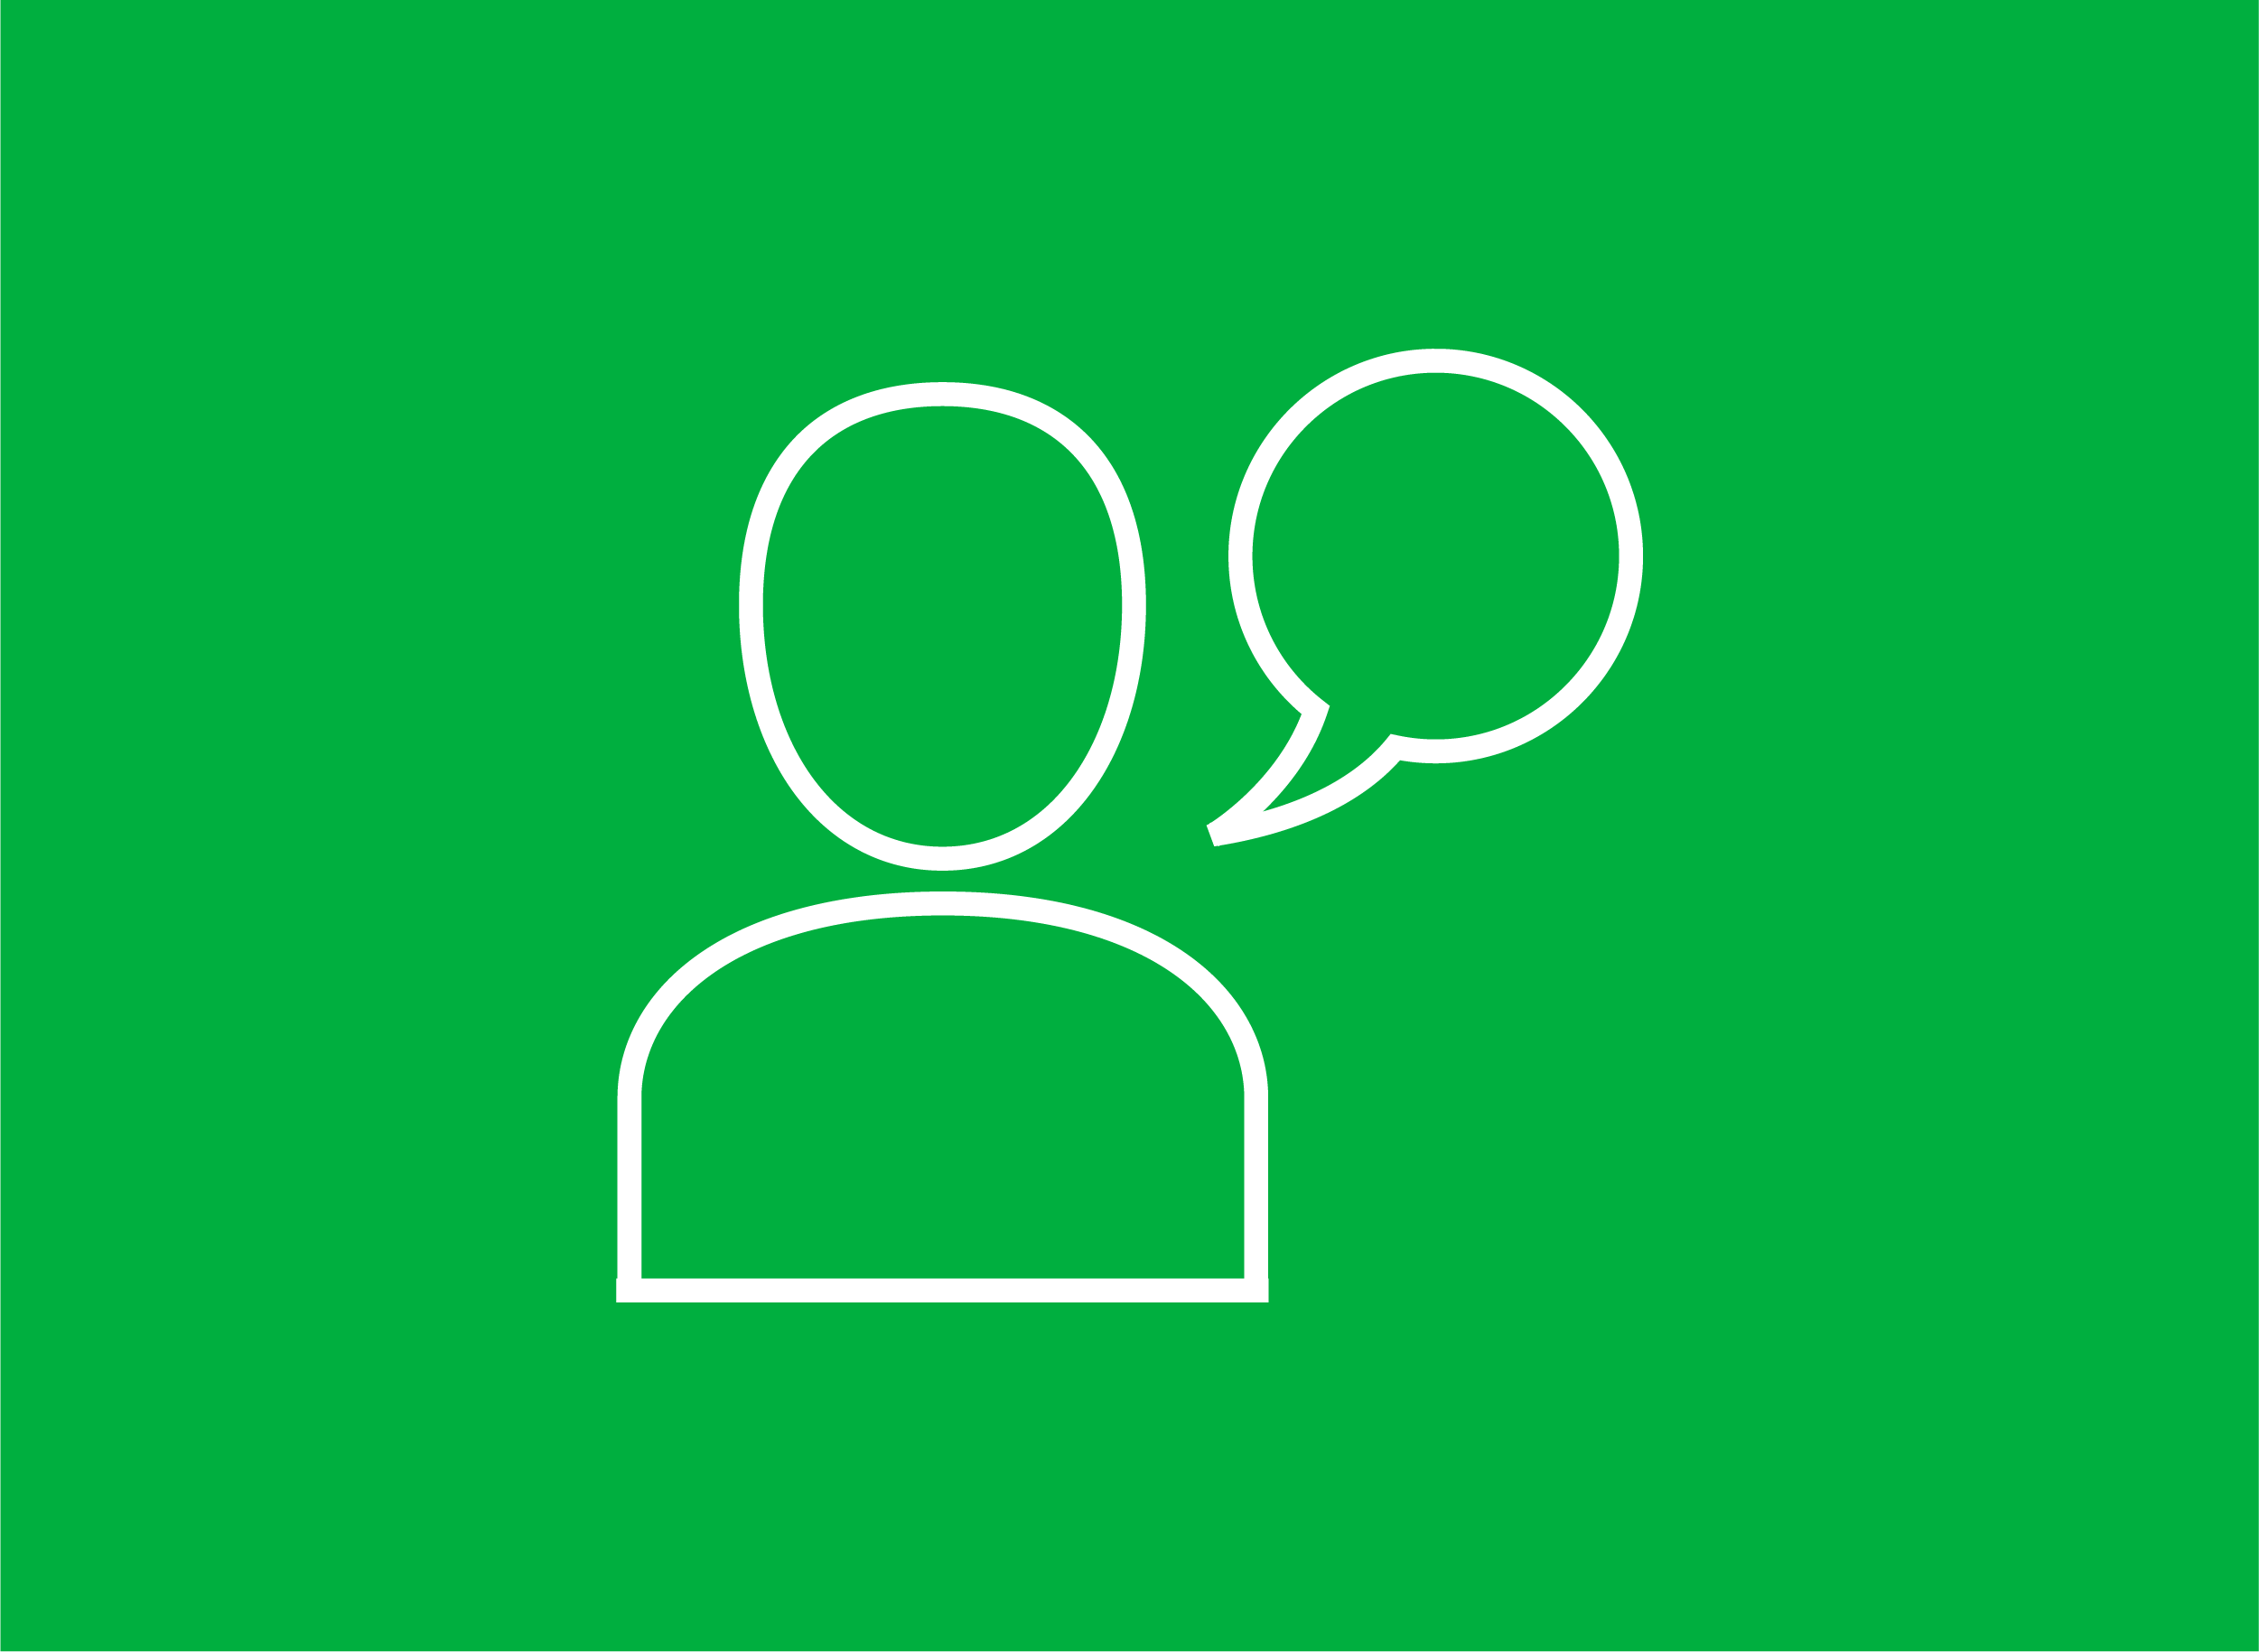 Green icon of a person with a speech bubble